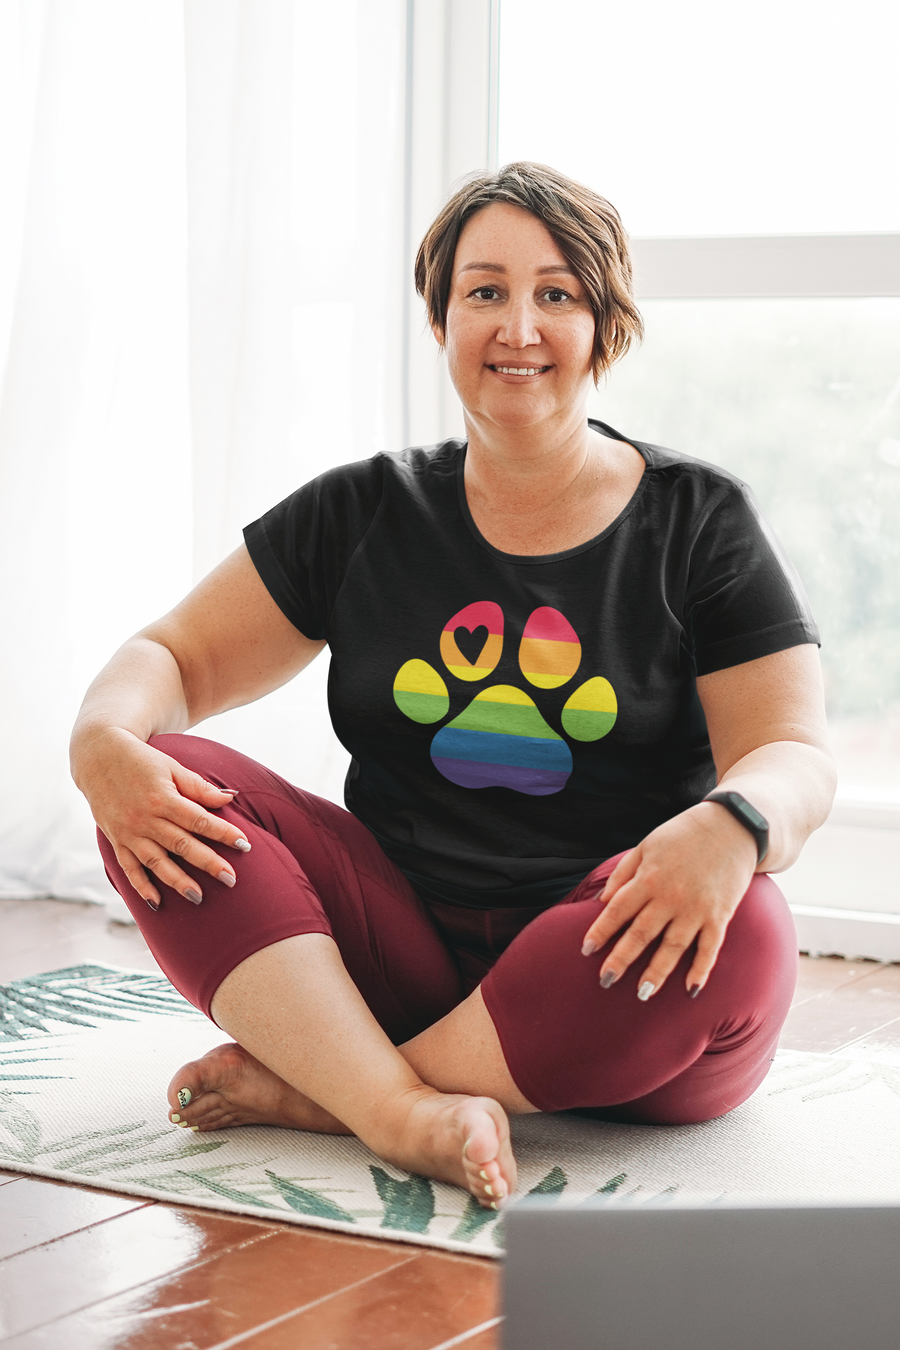 Rainbow Paw Print Tee | Infant Sizes up to Adult 5X